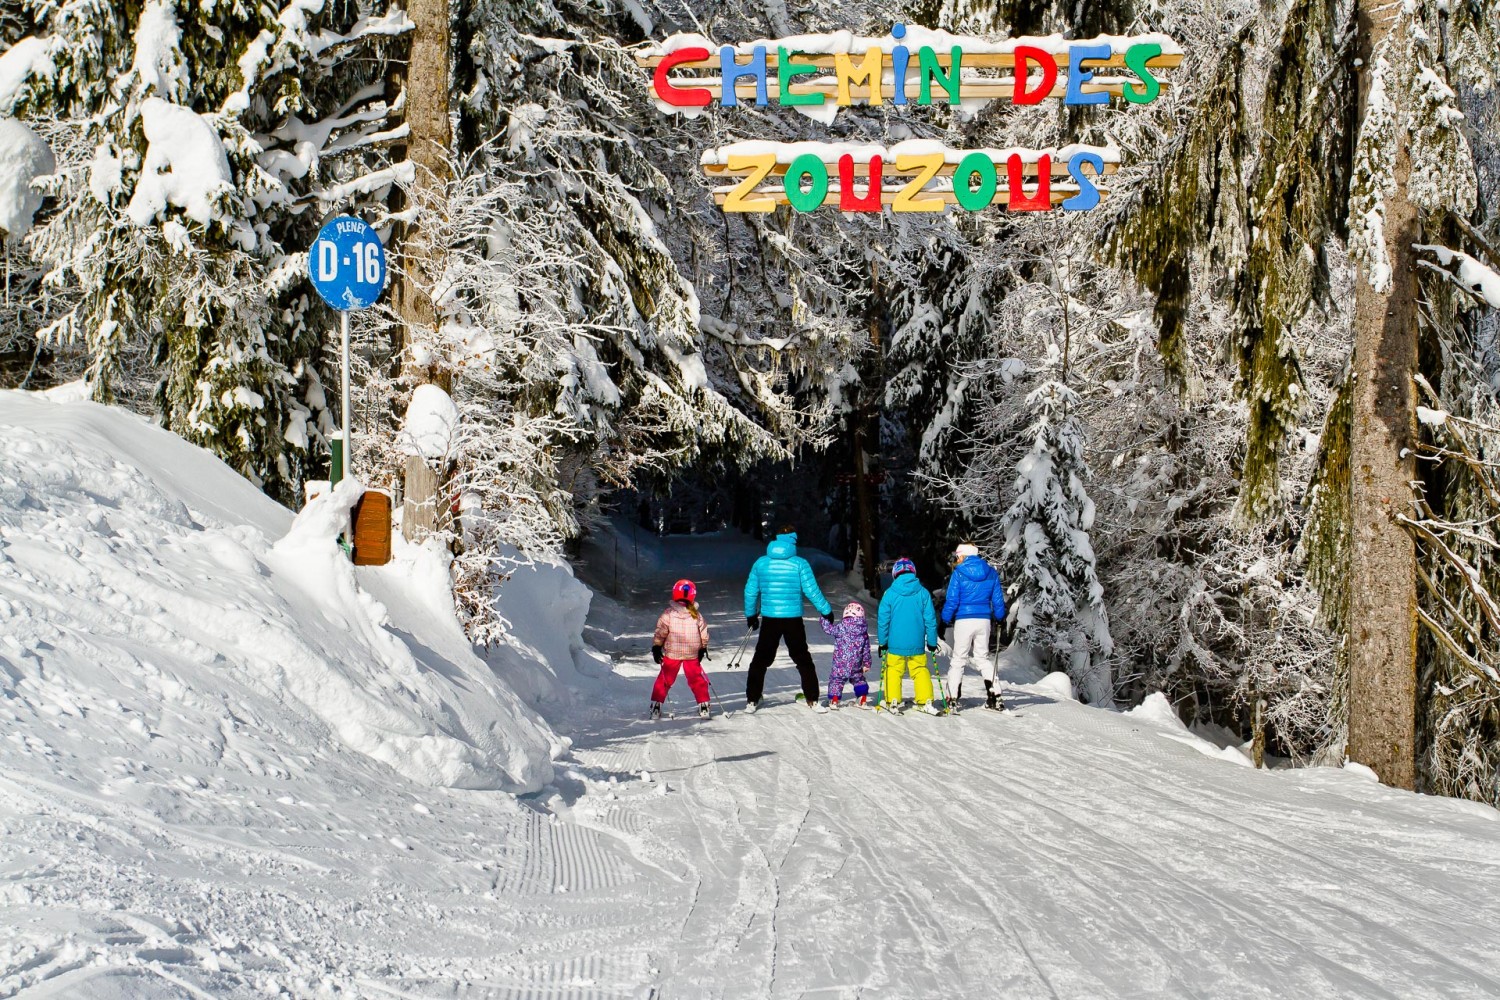 Family skiers entering Chemin des ZousZous attraction